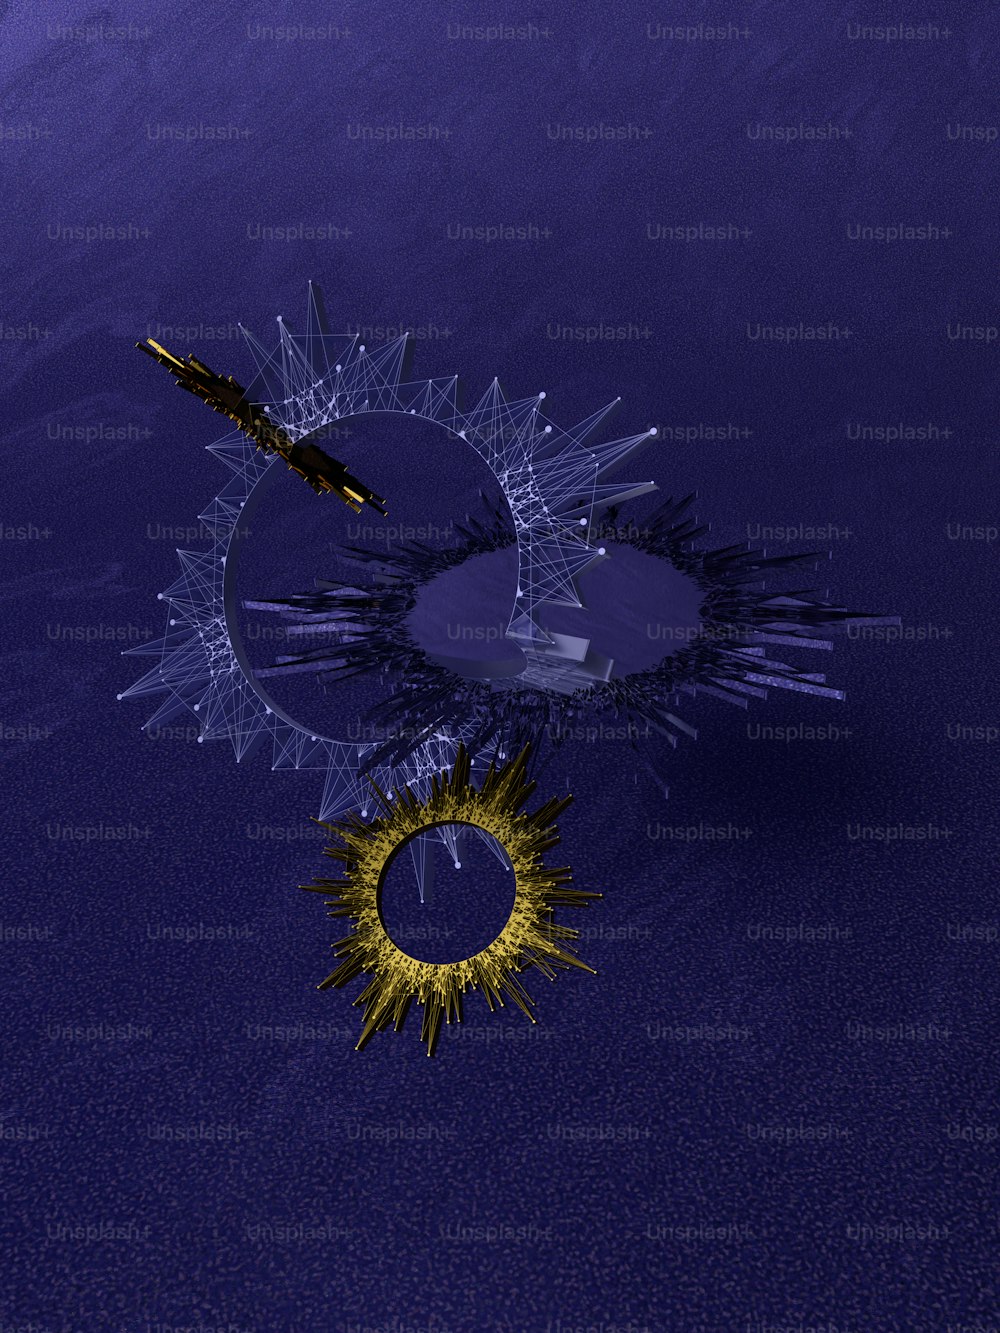 a computer generated image of a circular object